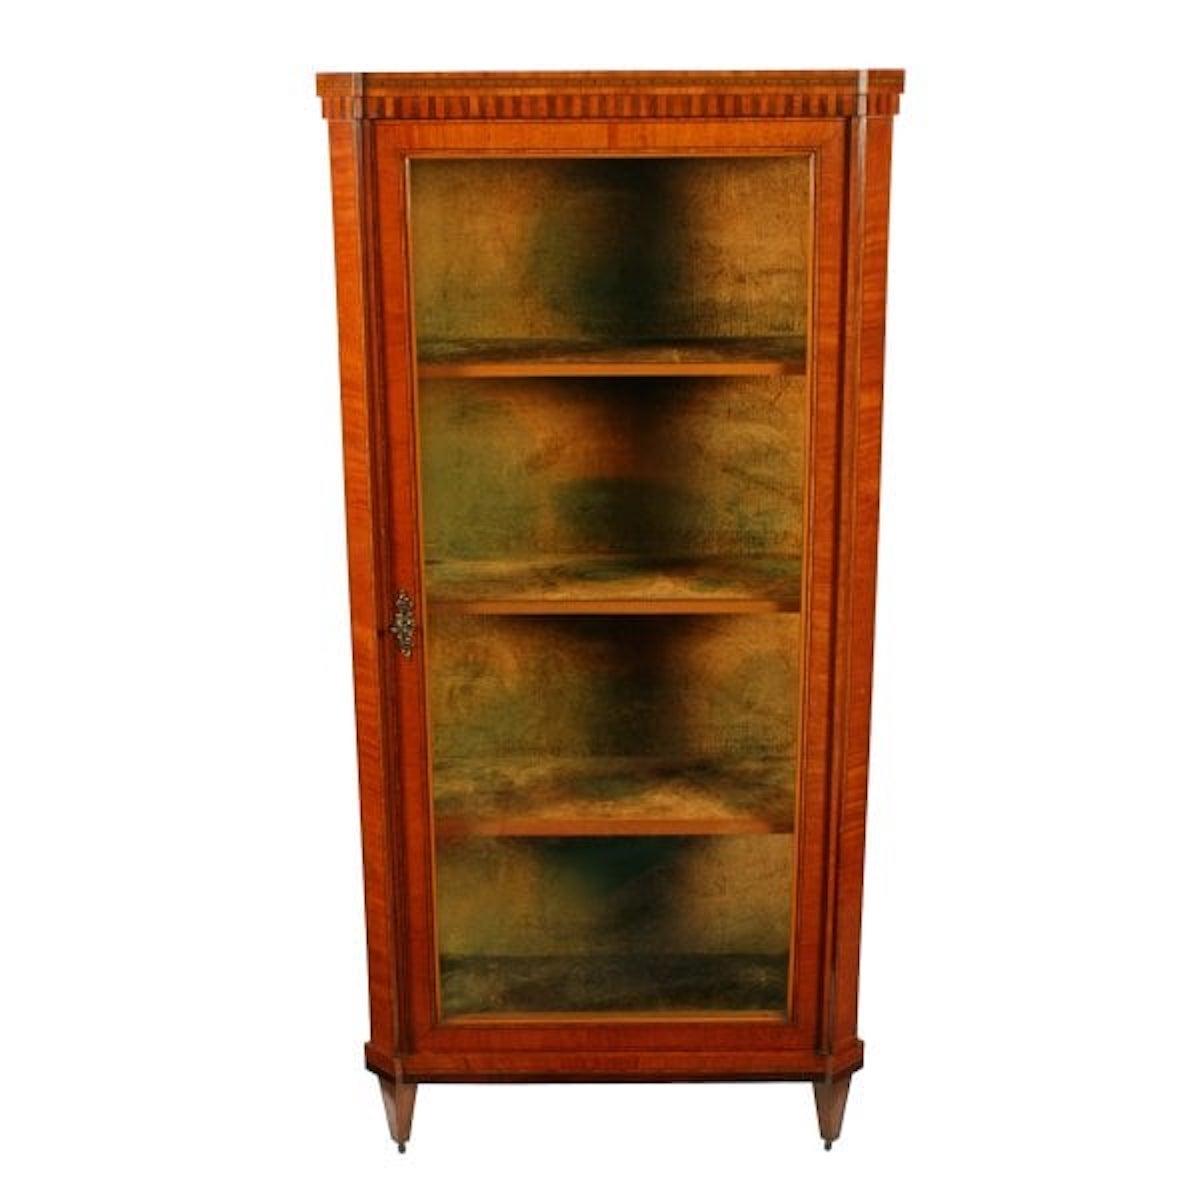 A 19th century Dutch satinwood single door display cabinet.

The cabinet is decorated with inlays and cross banding and has an inlaid dental decoration along the top edge.

The interior has three fixed shelves with satinwood front edges and